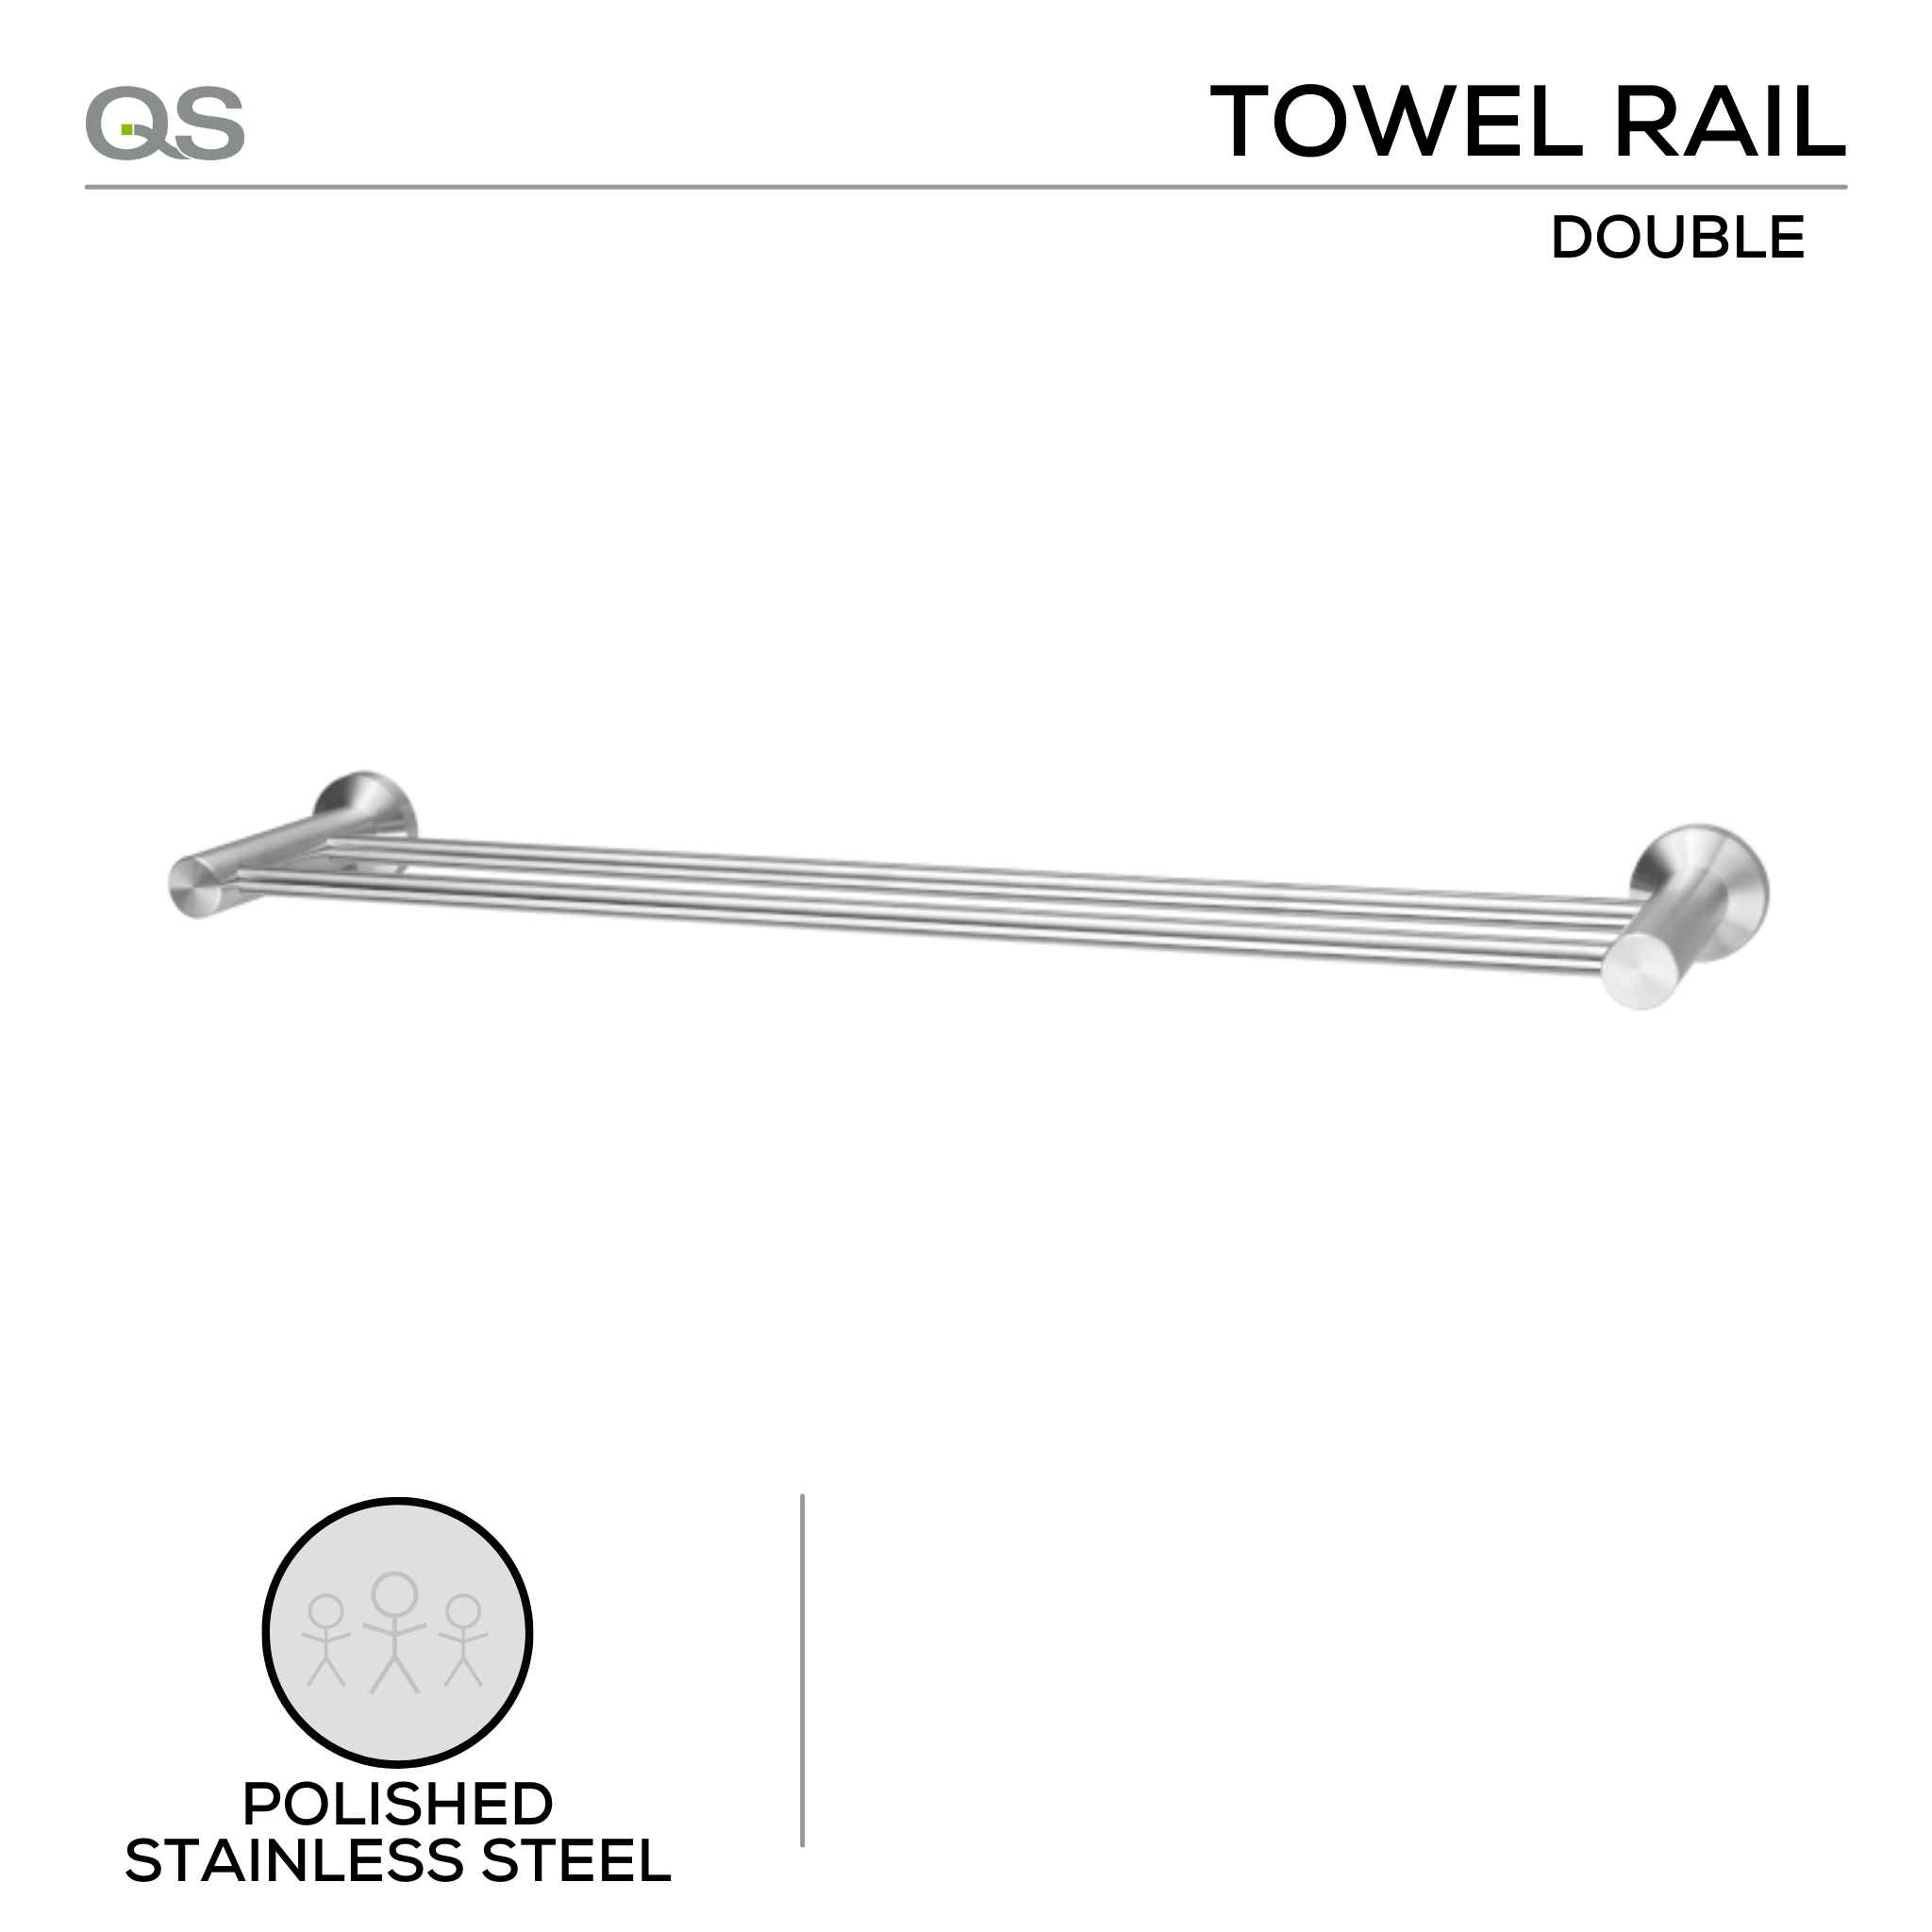 QS1502/PSS, Towel Rail, Double, Polished Stainless Steel, QS